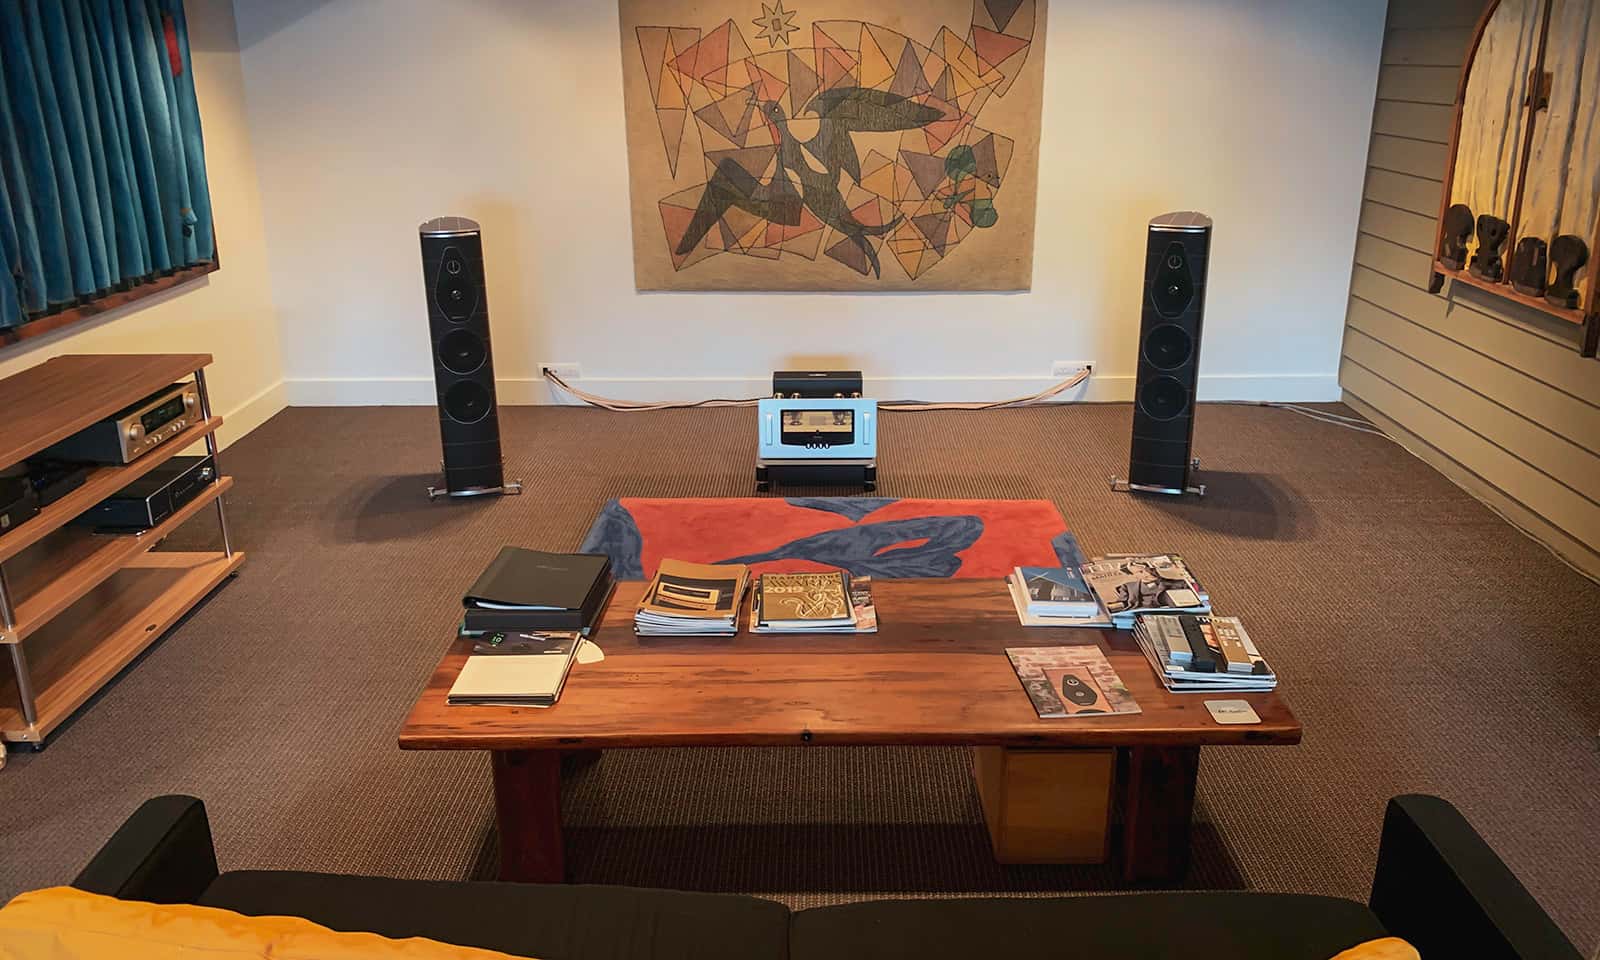 Soundline Christchurch supplies audio equipment, speakers, turntables, amplifiers, home theatre gear. Soundline also provides installation of home audio, home automation and home theatre systems.